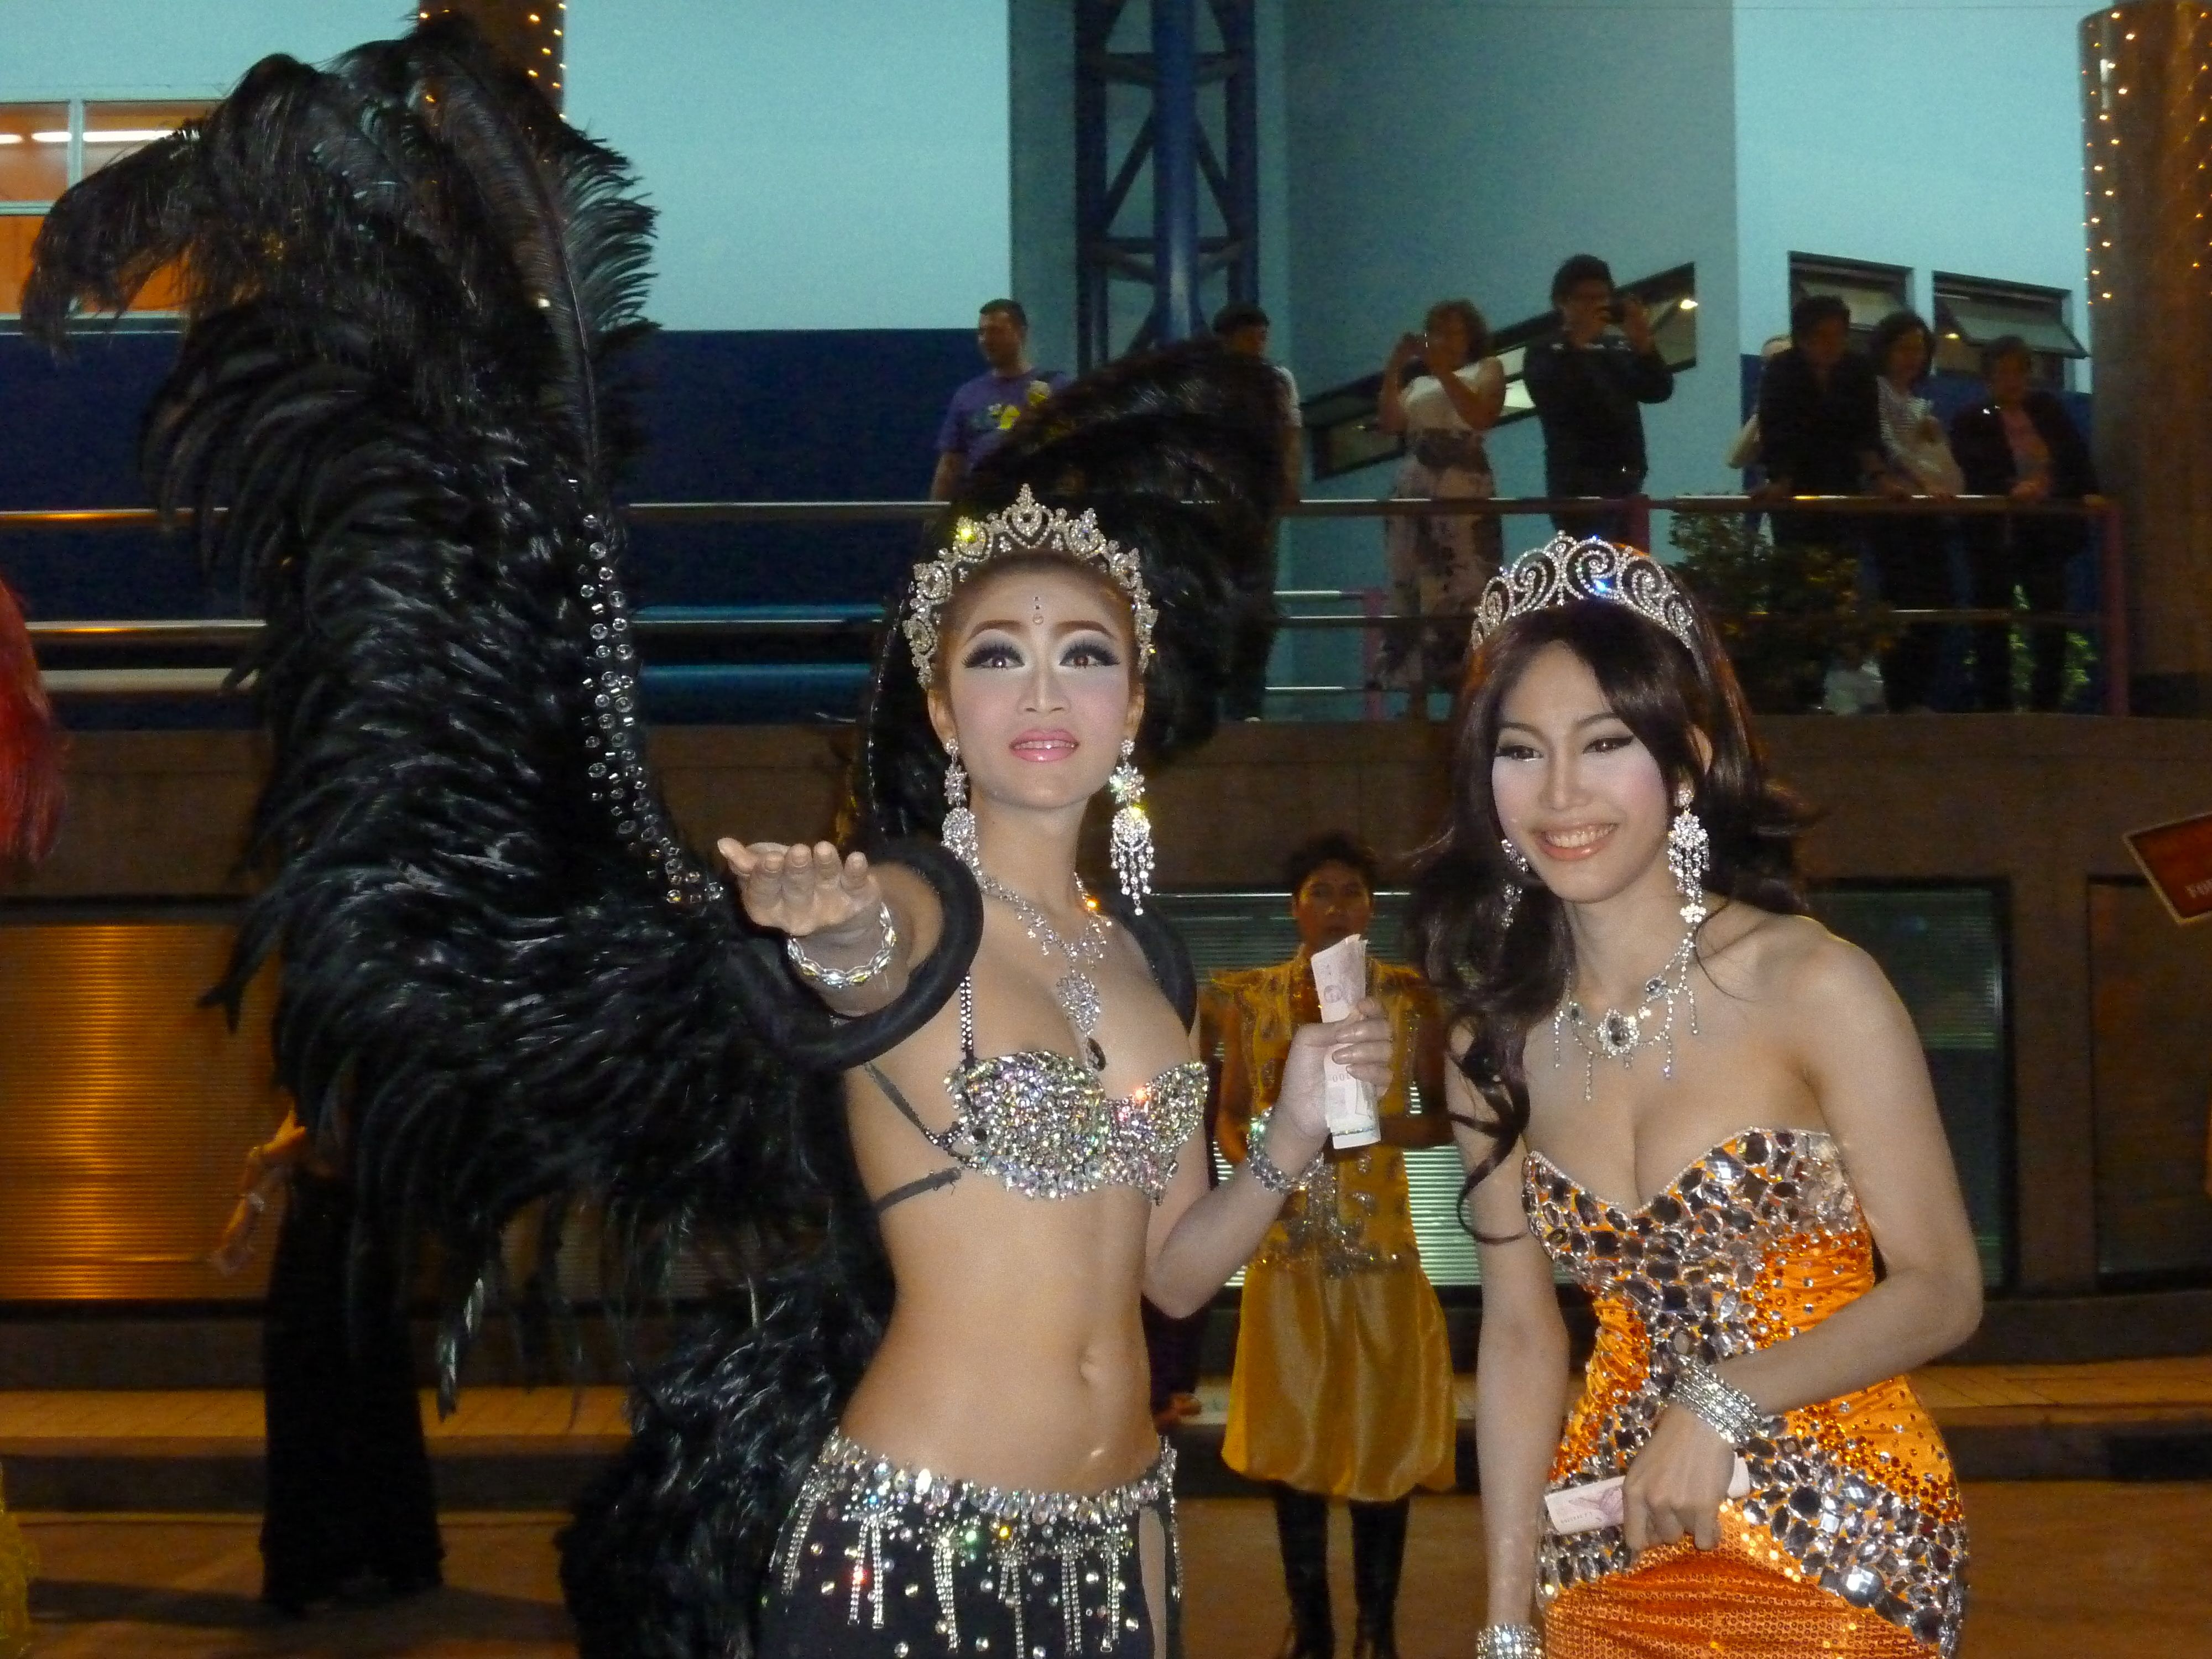 Photo of two kathoey performers shown from the waist up